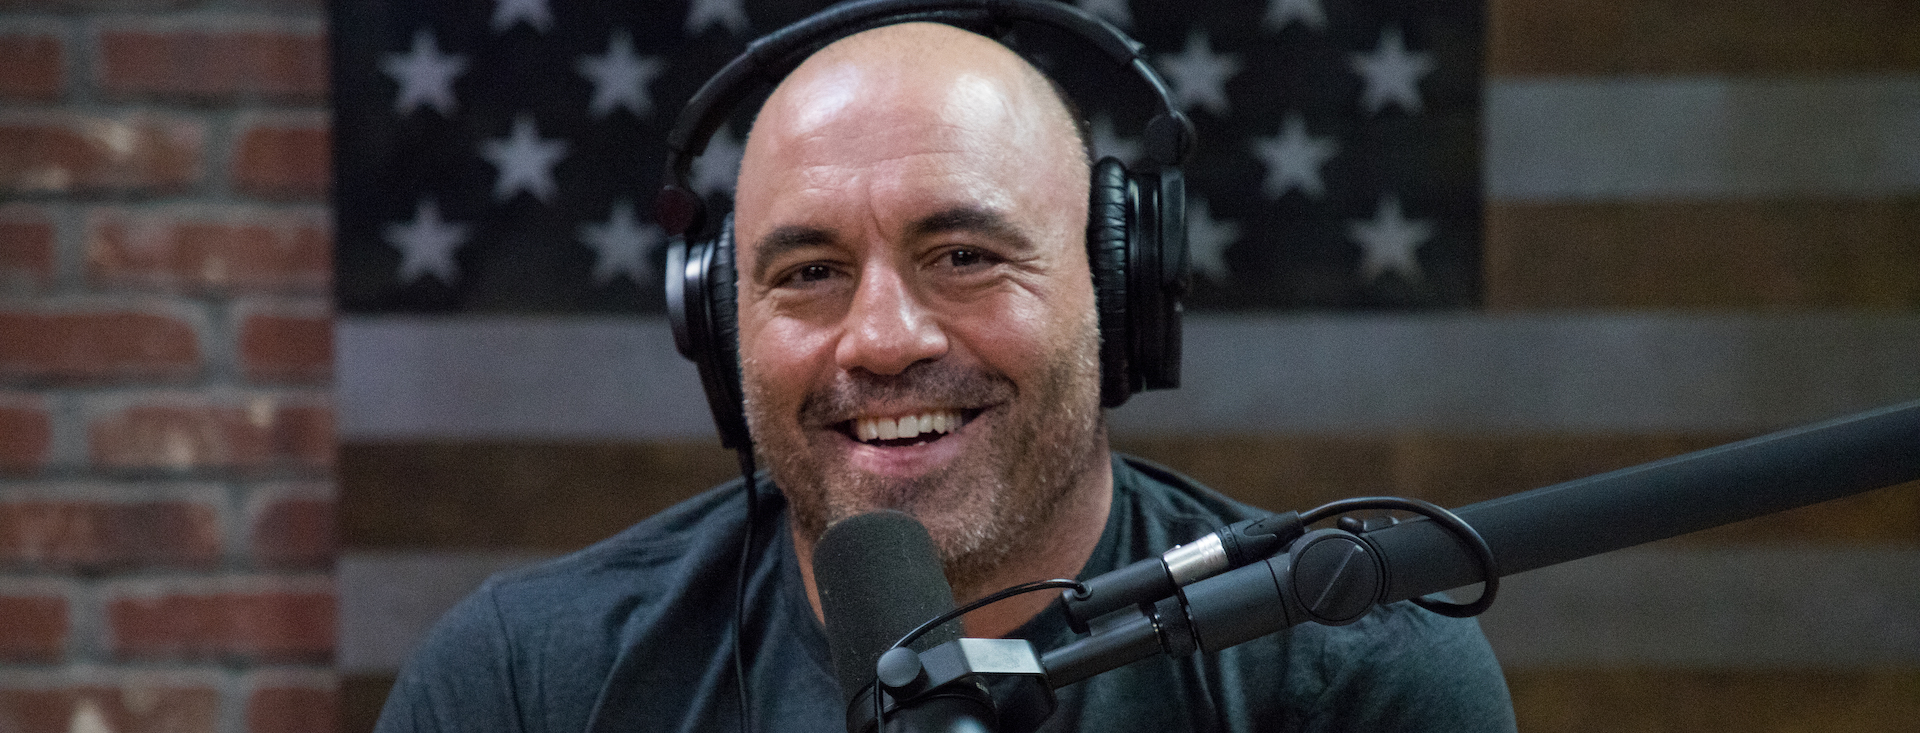 The Joe Rogan Experience' Launches Exclusive Partnership with Spotify —  Spotify